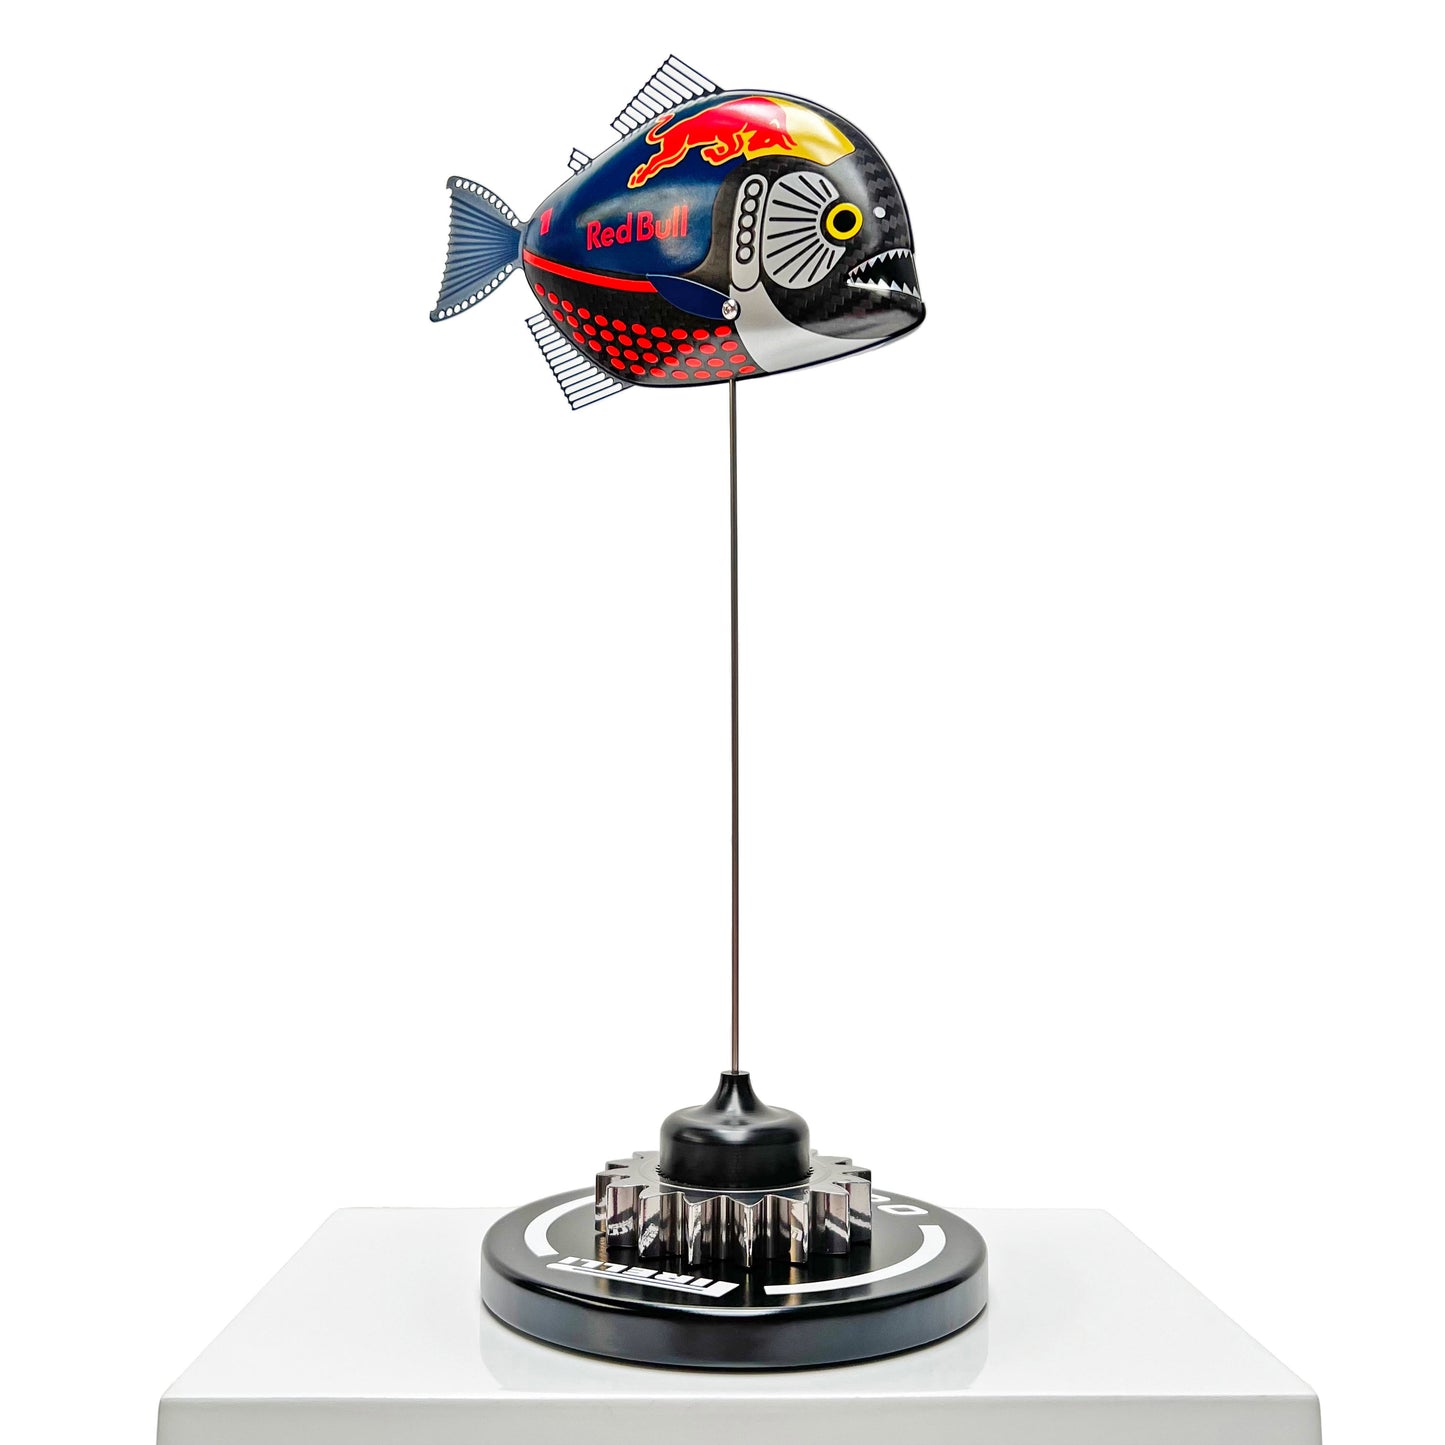 Carbon fibre Piranha fish with RedBull F1 livery on a black base with F1 gear